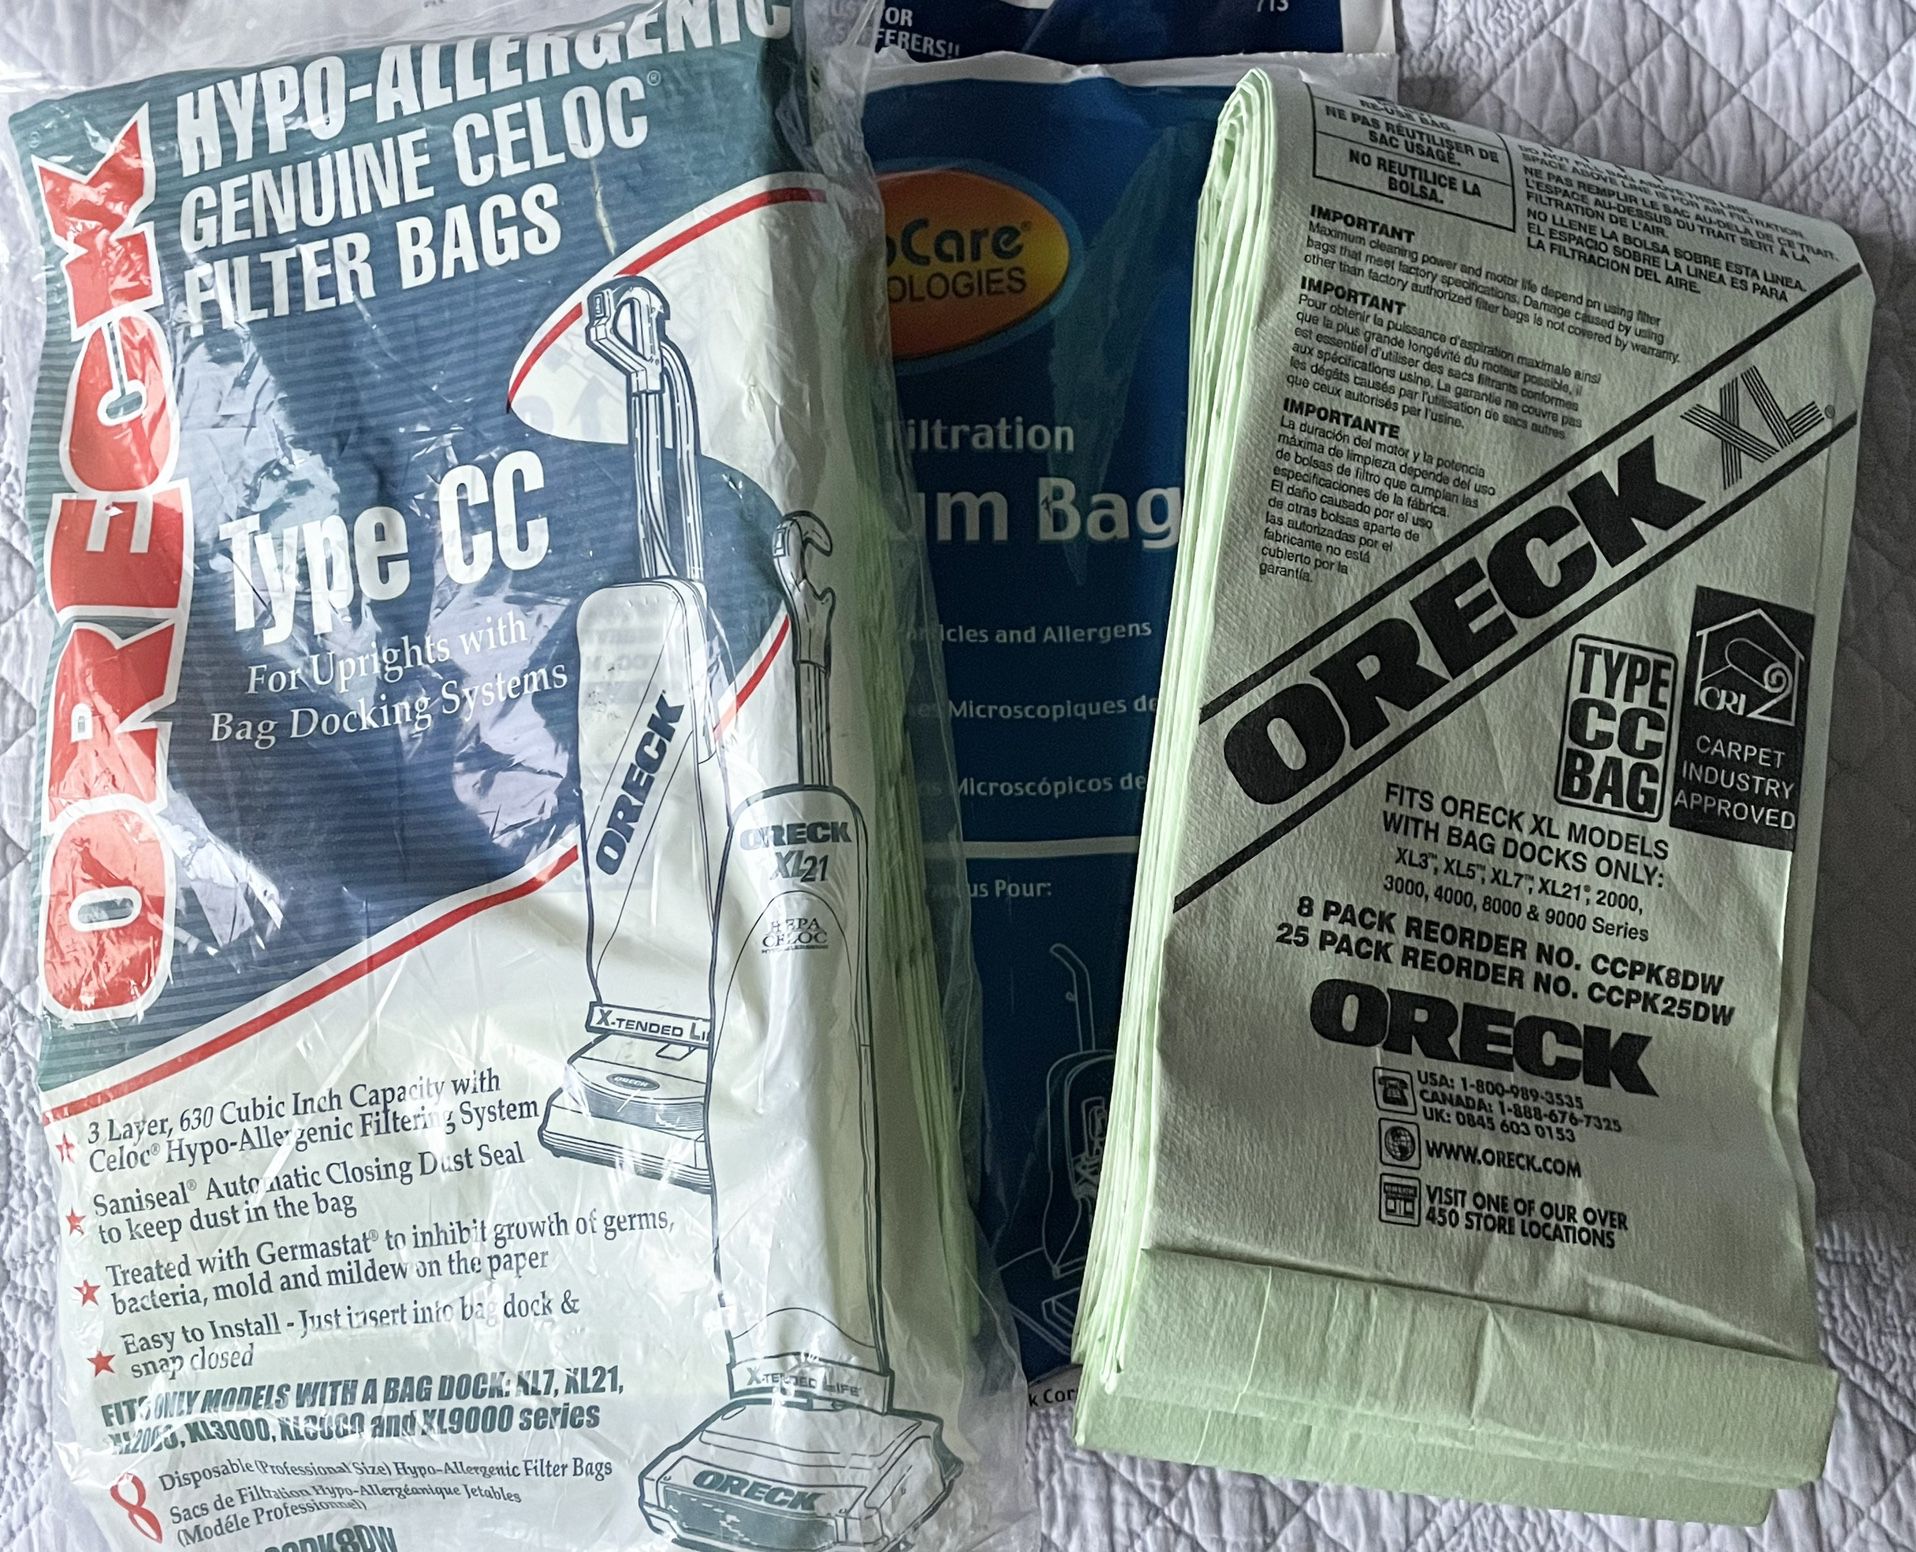 21 Oreck XL Type CC Vacuum Cleaner Bags CCPK8DW Hypo Allergenic Celoc Filter. There are 14 Original Oreck bags and 7 EnviroCare Oreck Type CC bags.